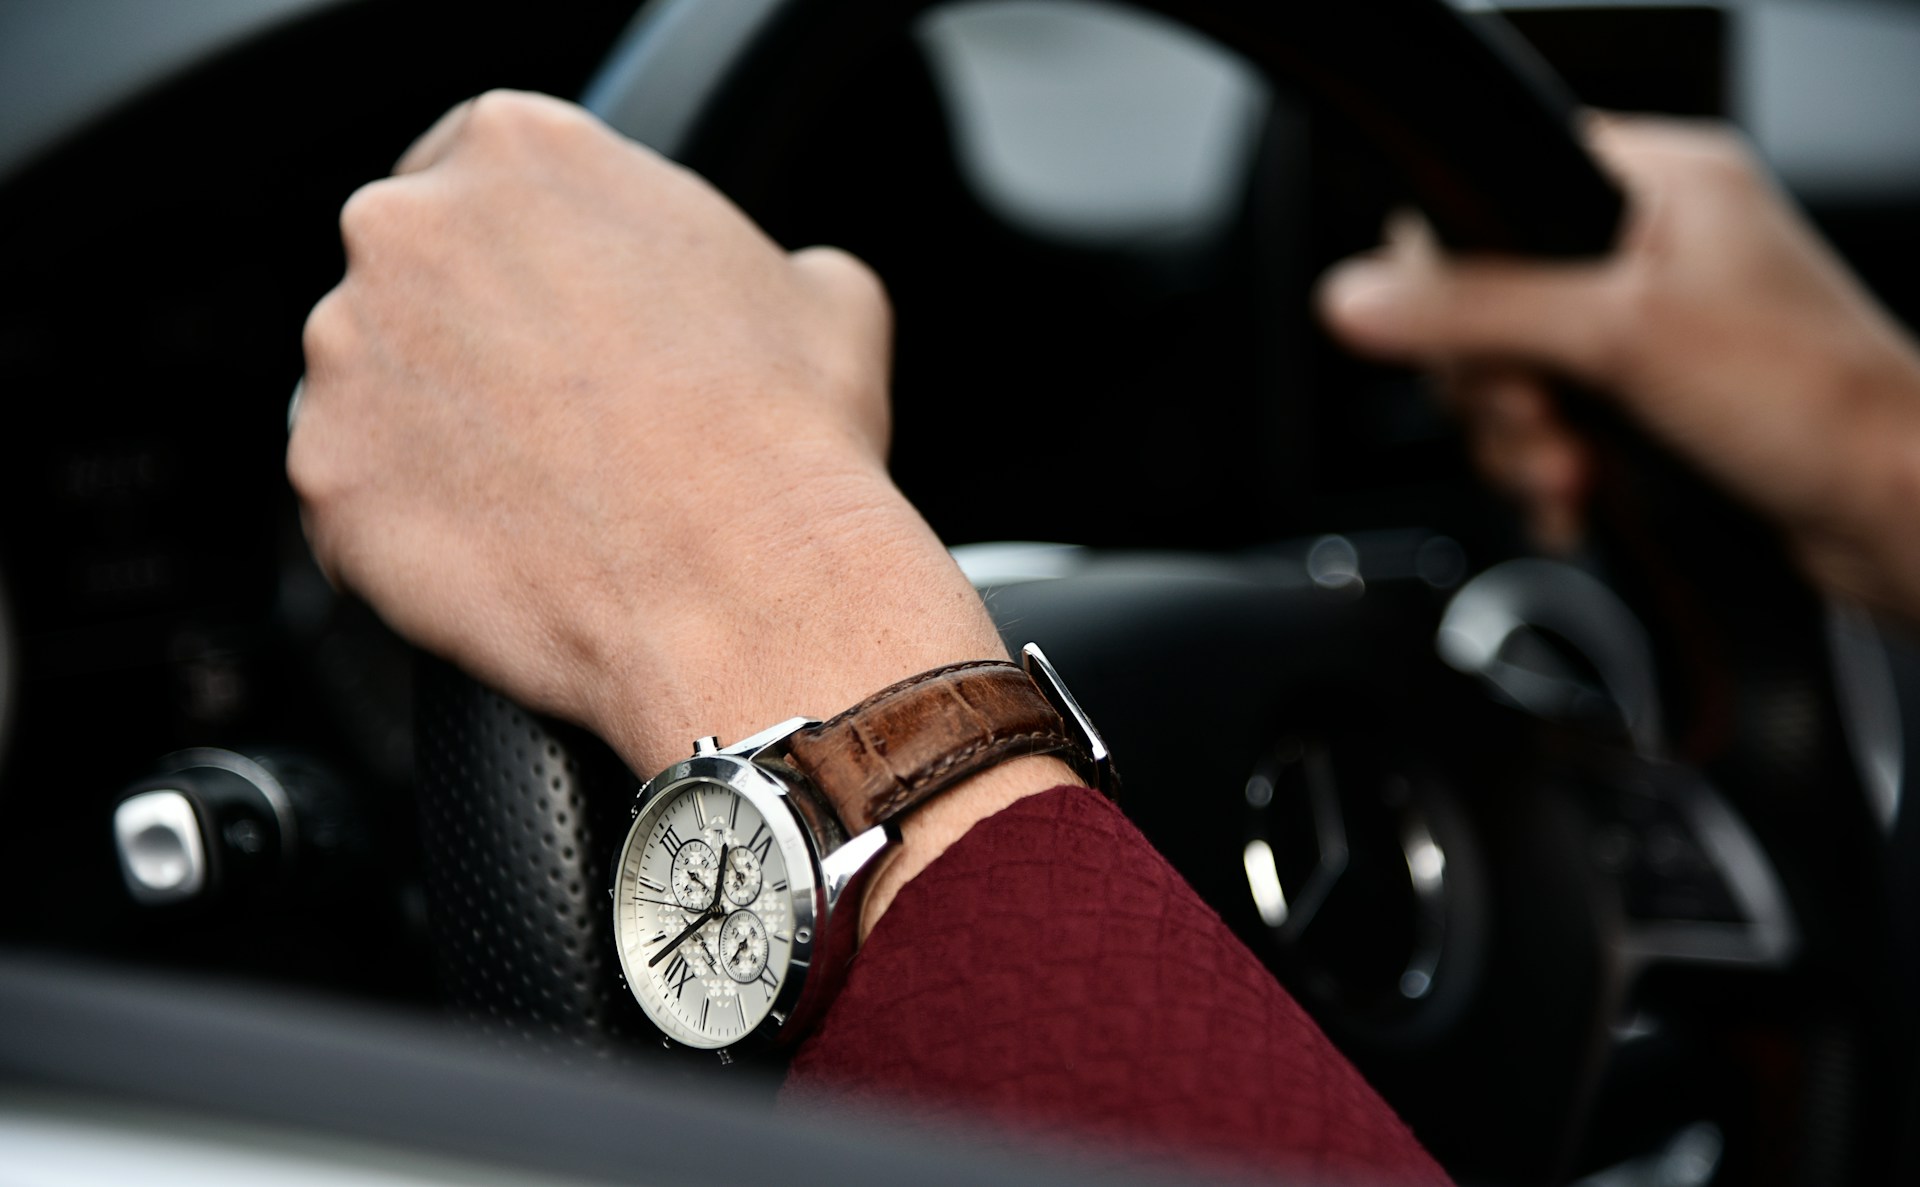 a person with their hands on a steering wheel, wearing a white and silver watch